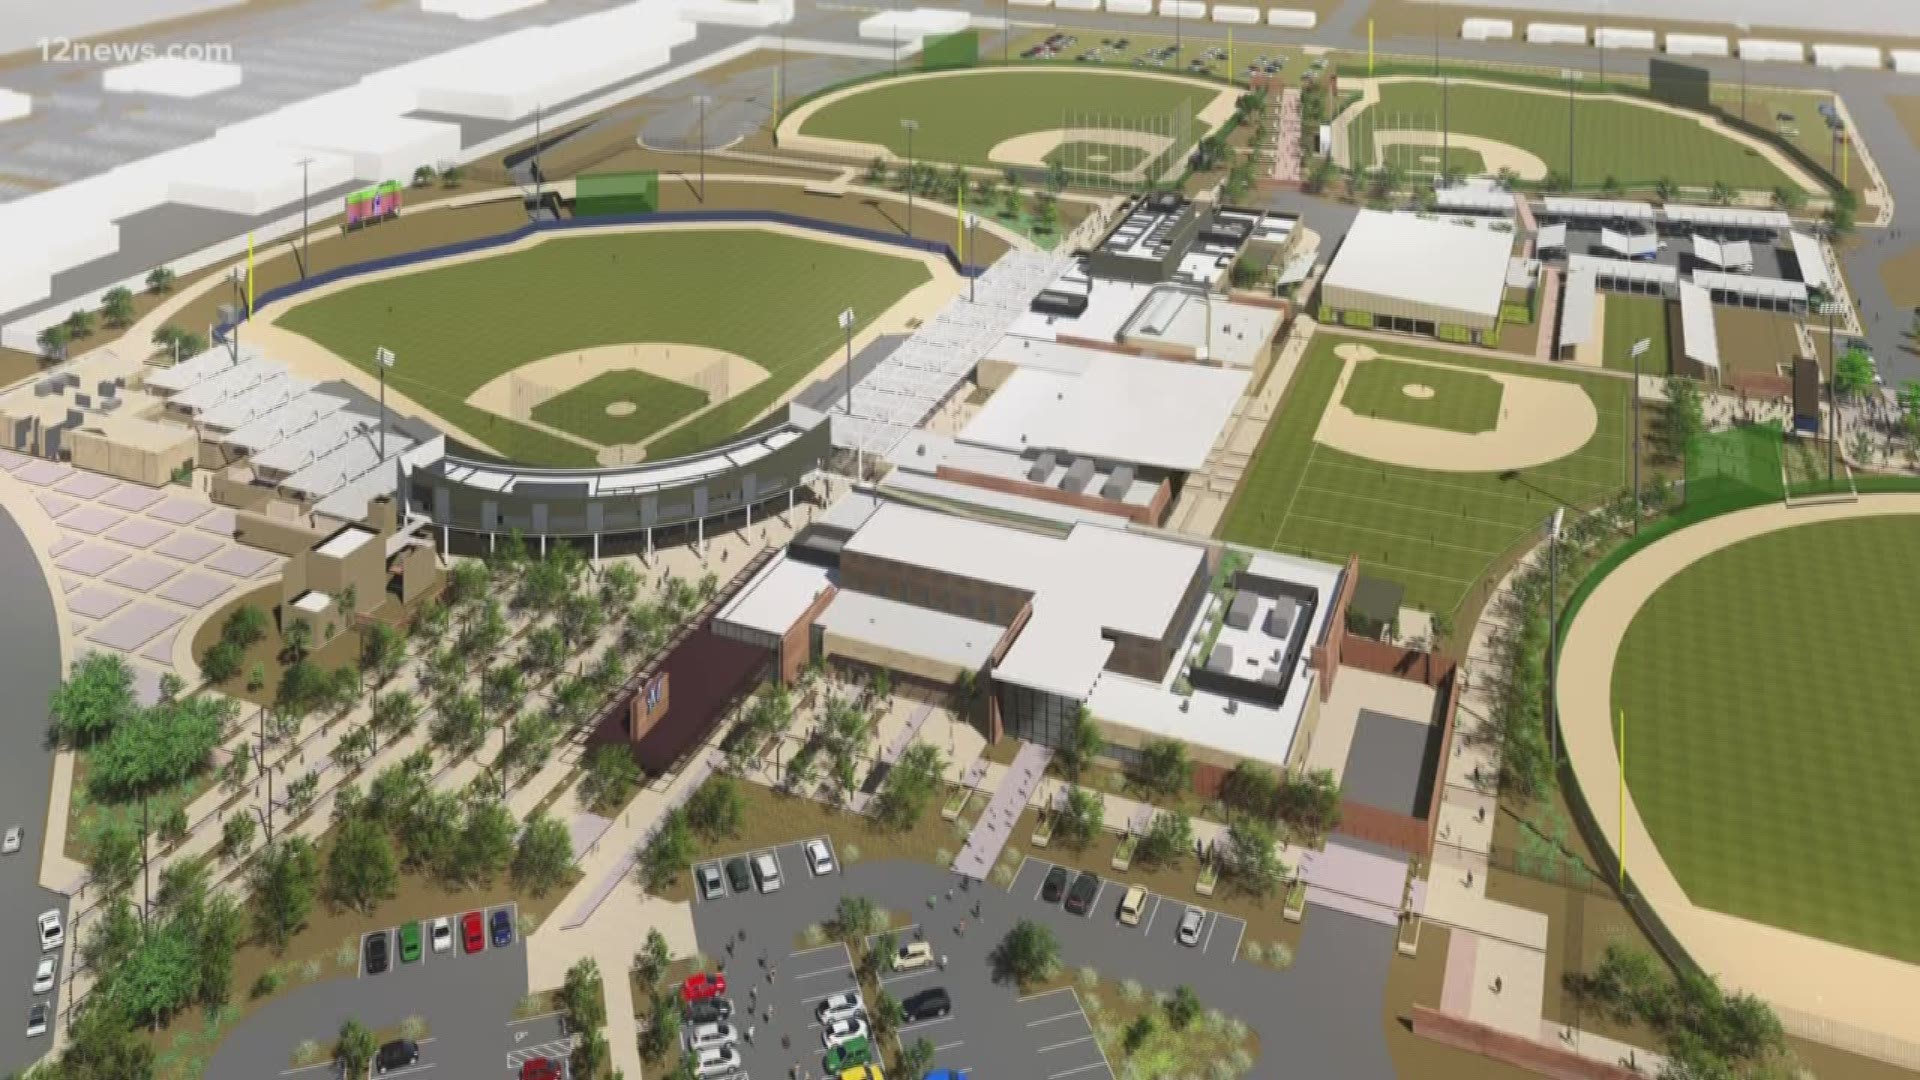 The Milwaukee Brewers spring training stadium is getting a makeover. Construction on the new ballpark took a huge step forward today. Check it out!